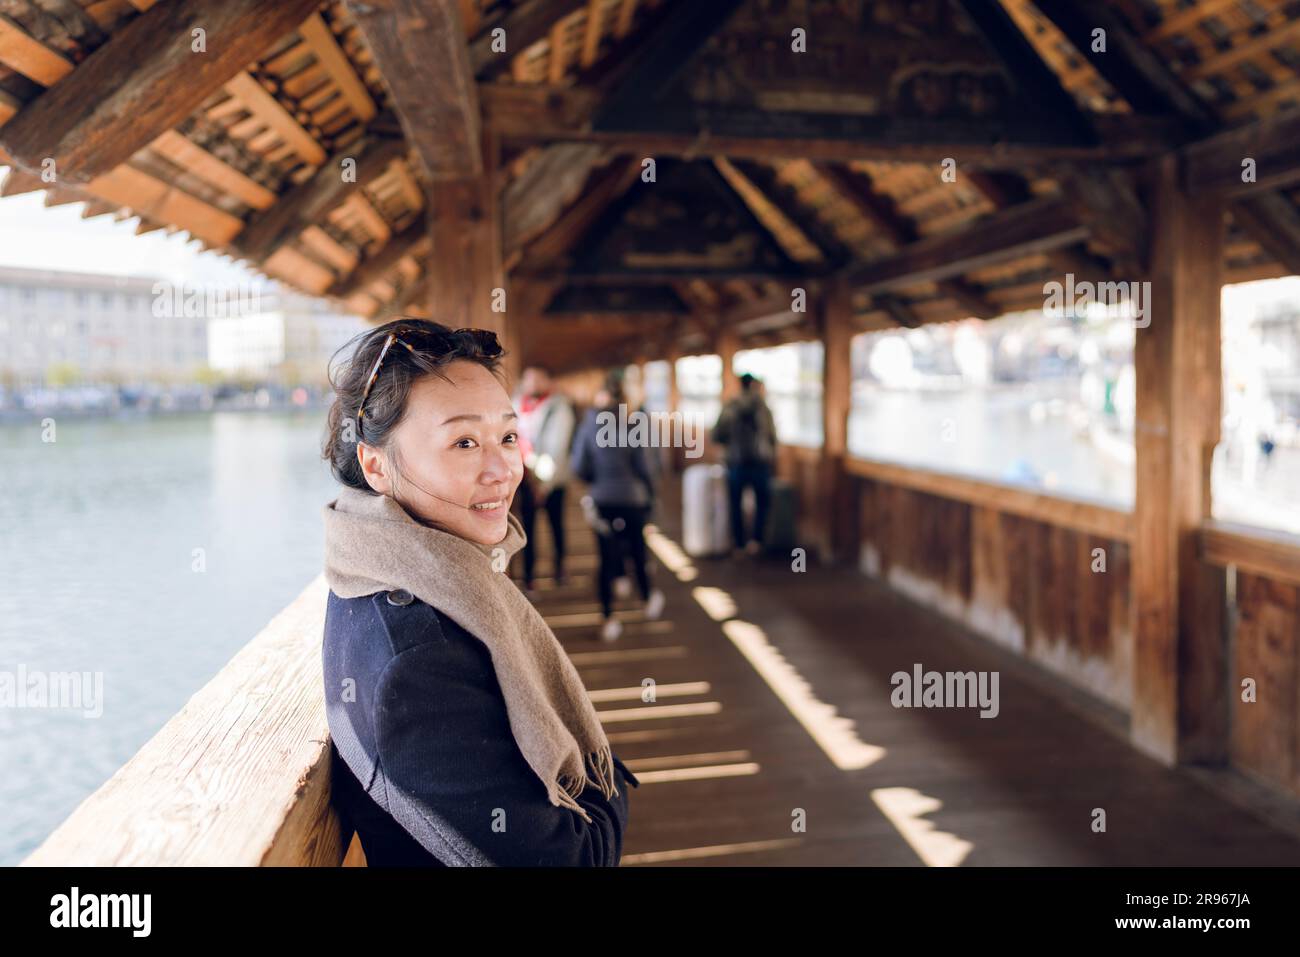 A woman standing on Chapel Bridge. The Chapel Bridge is a covered wooden footbridge spanning the river Reuss diagonally in the city of Lucerne in cent Stock Photo